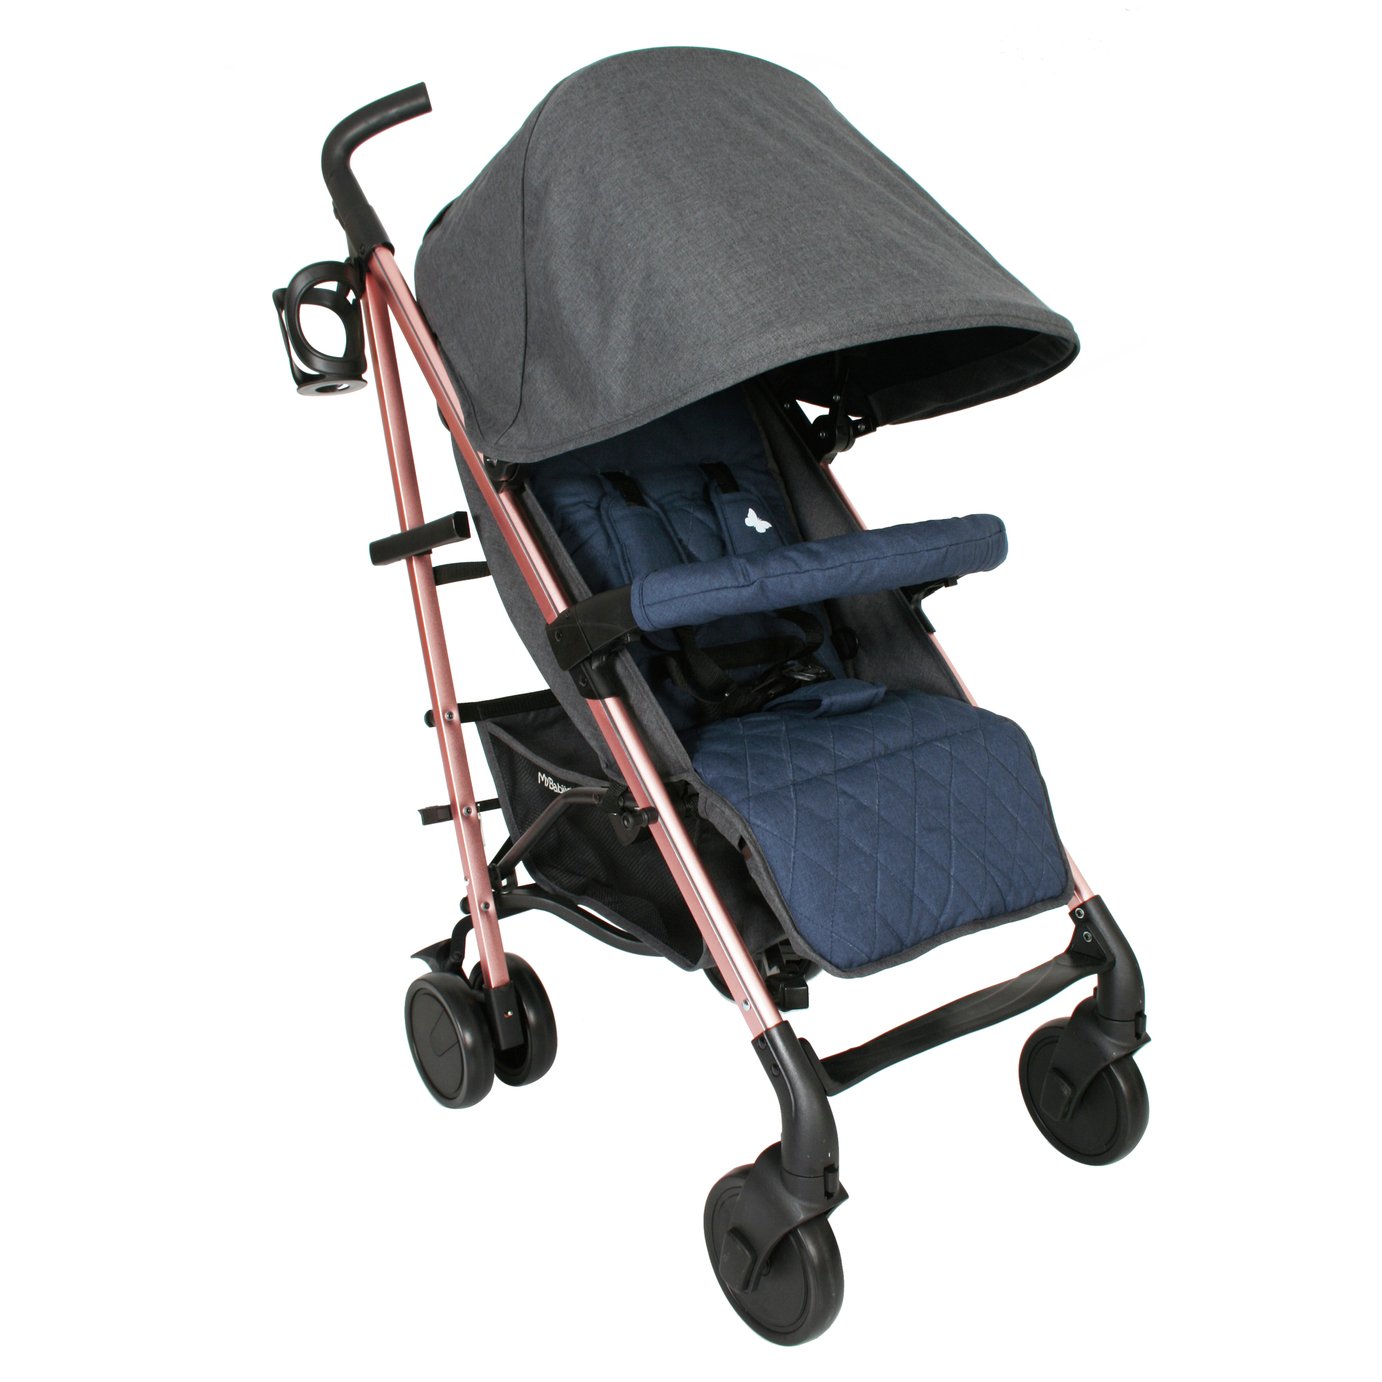 My Babiie Katie Piper MB51 Pushchair - Rose Gold & Grey